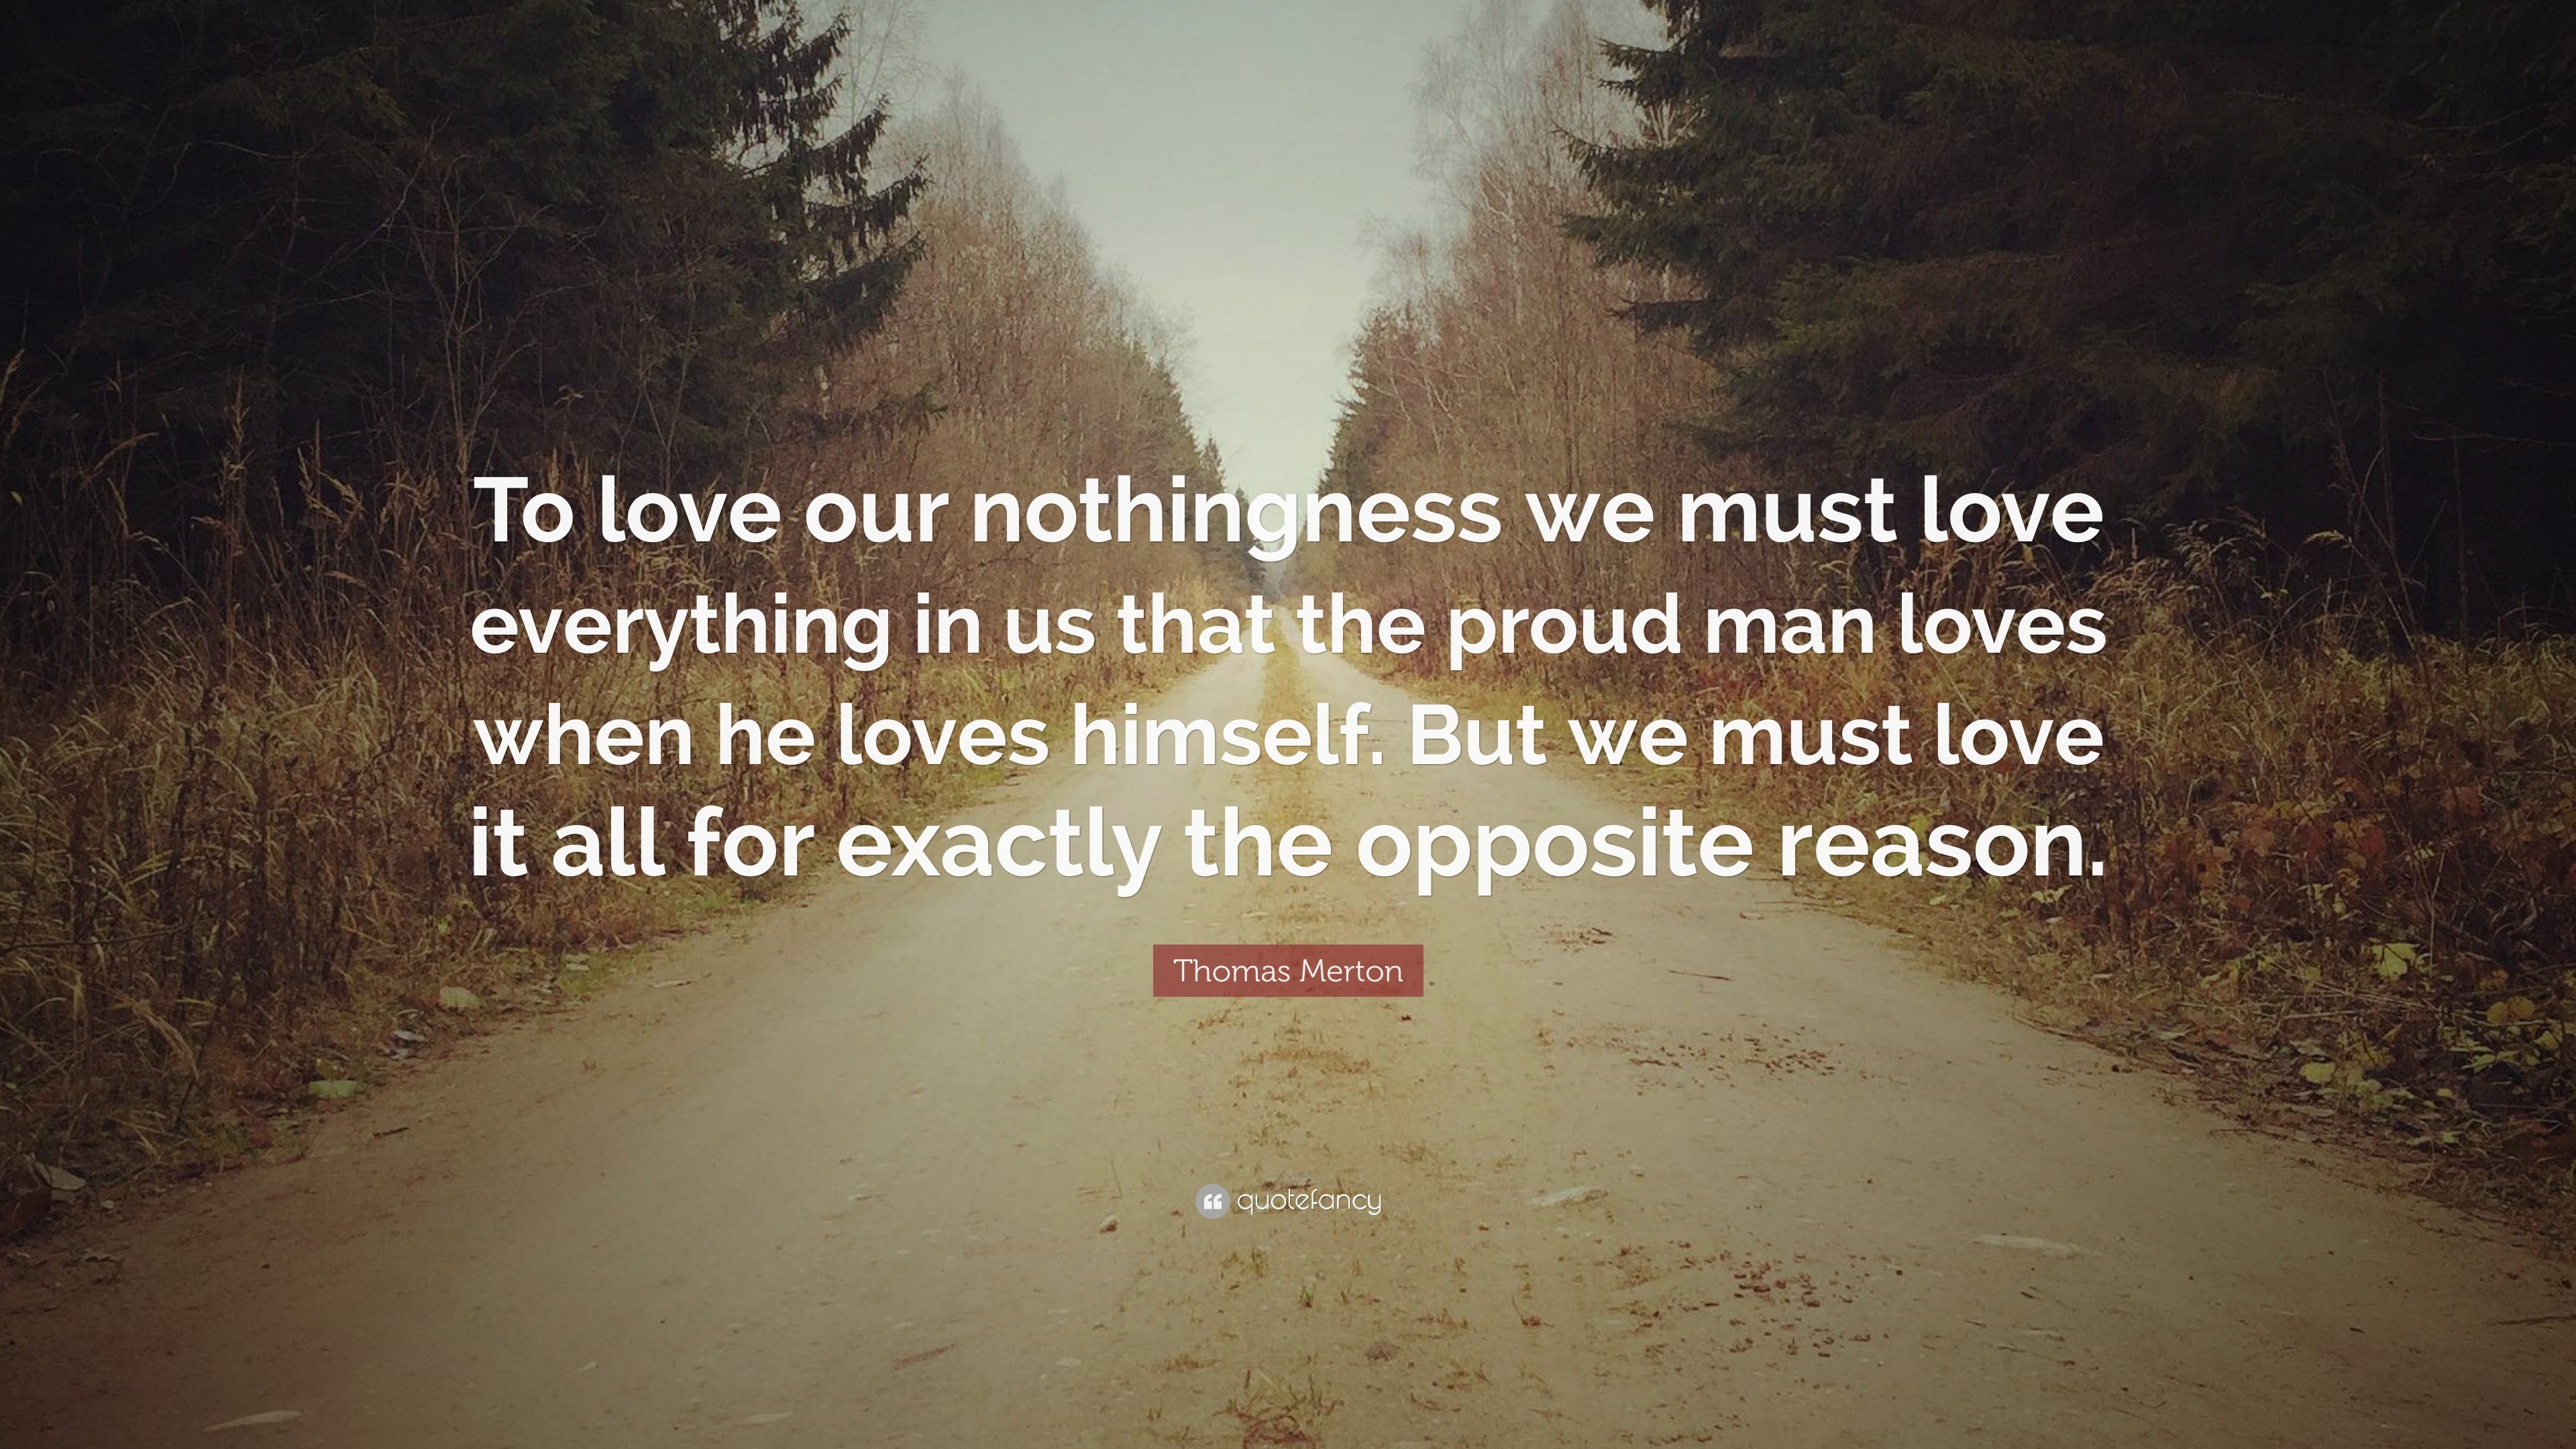 Thomas Merton Quote: “To love our nothingness we must love everything ...